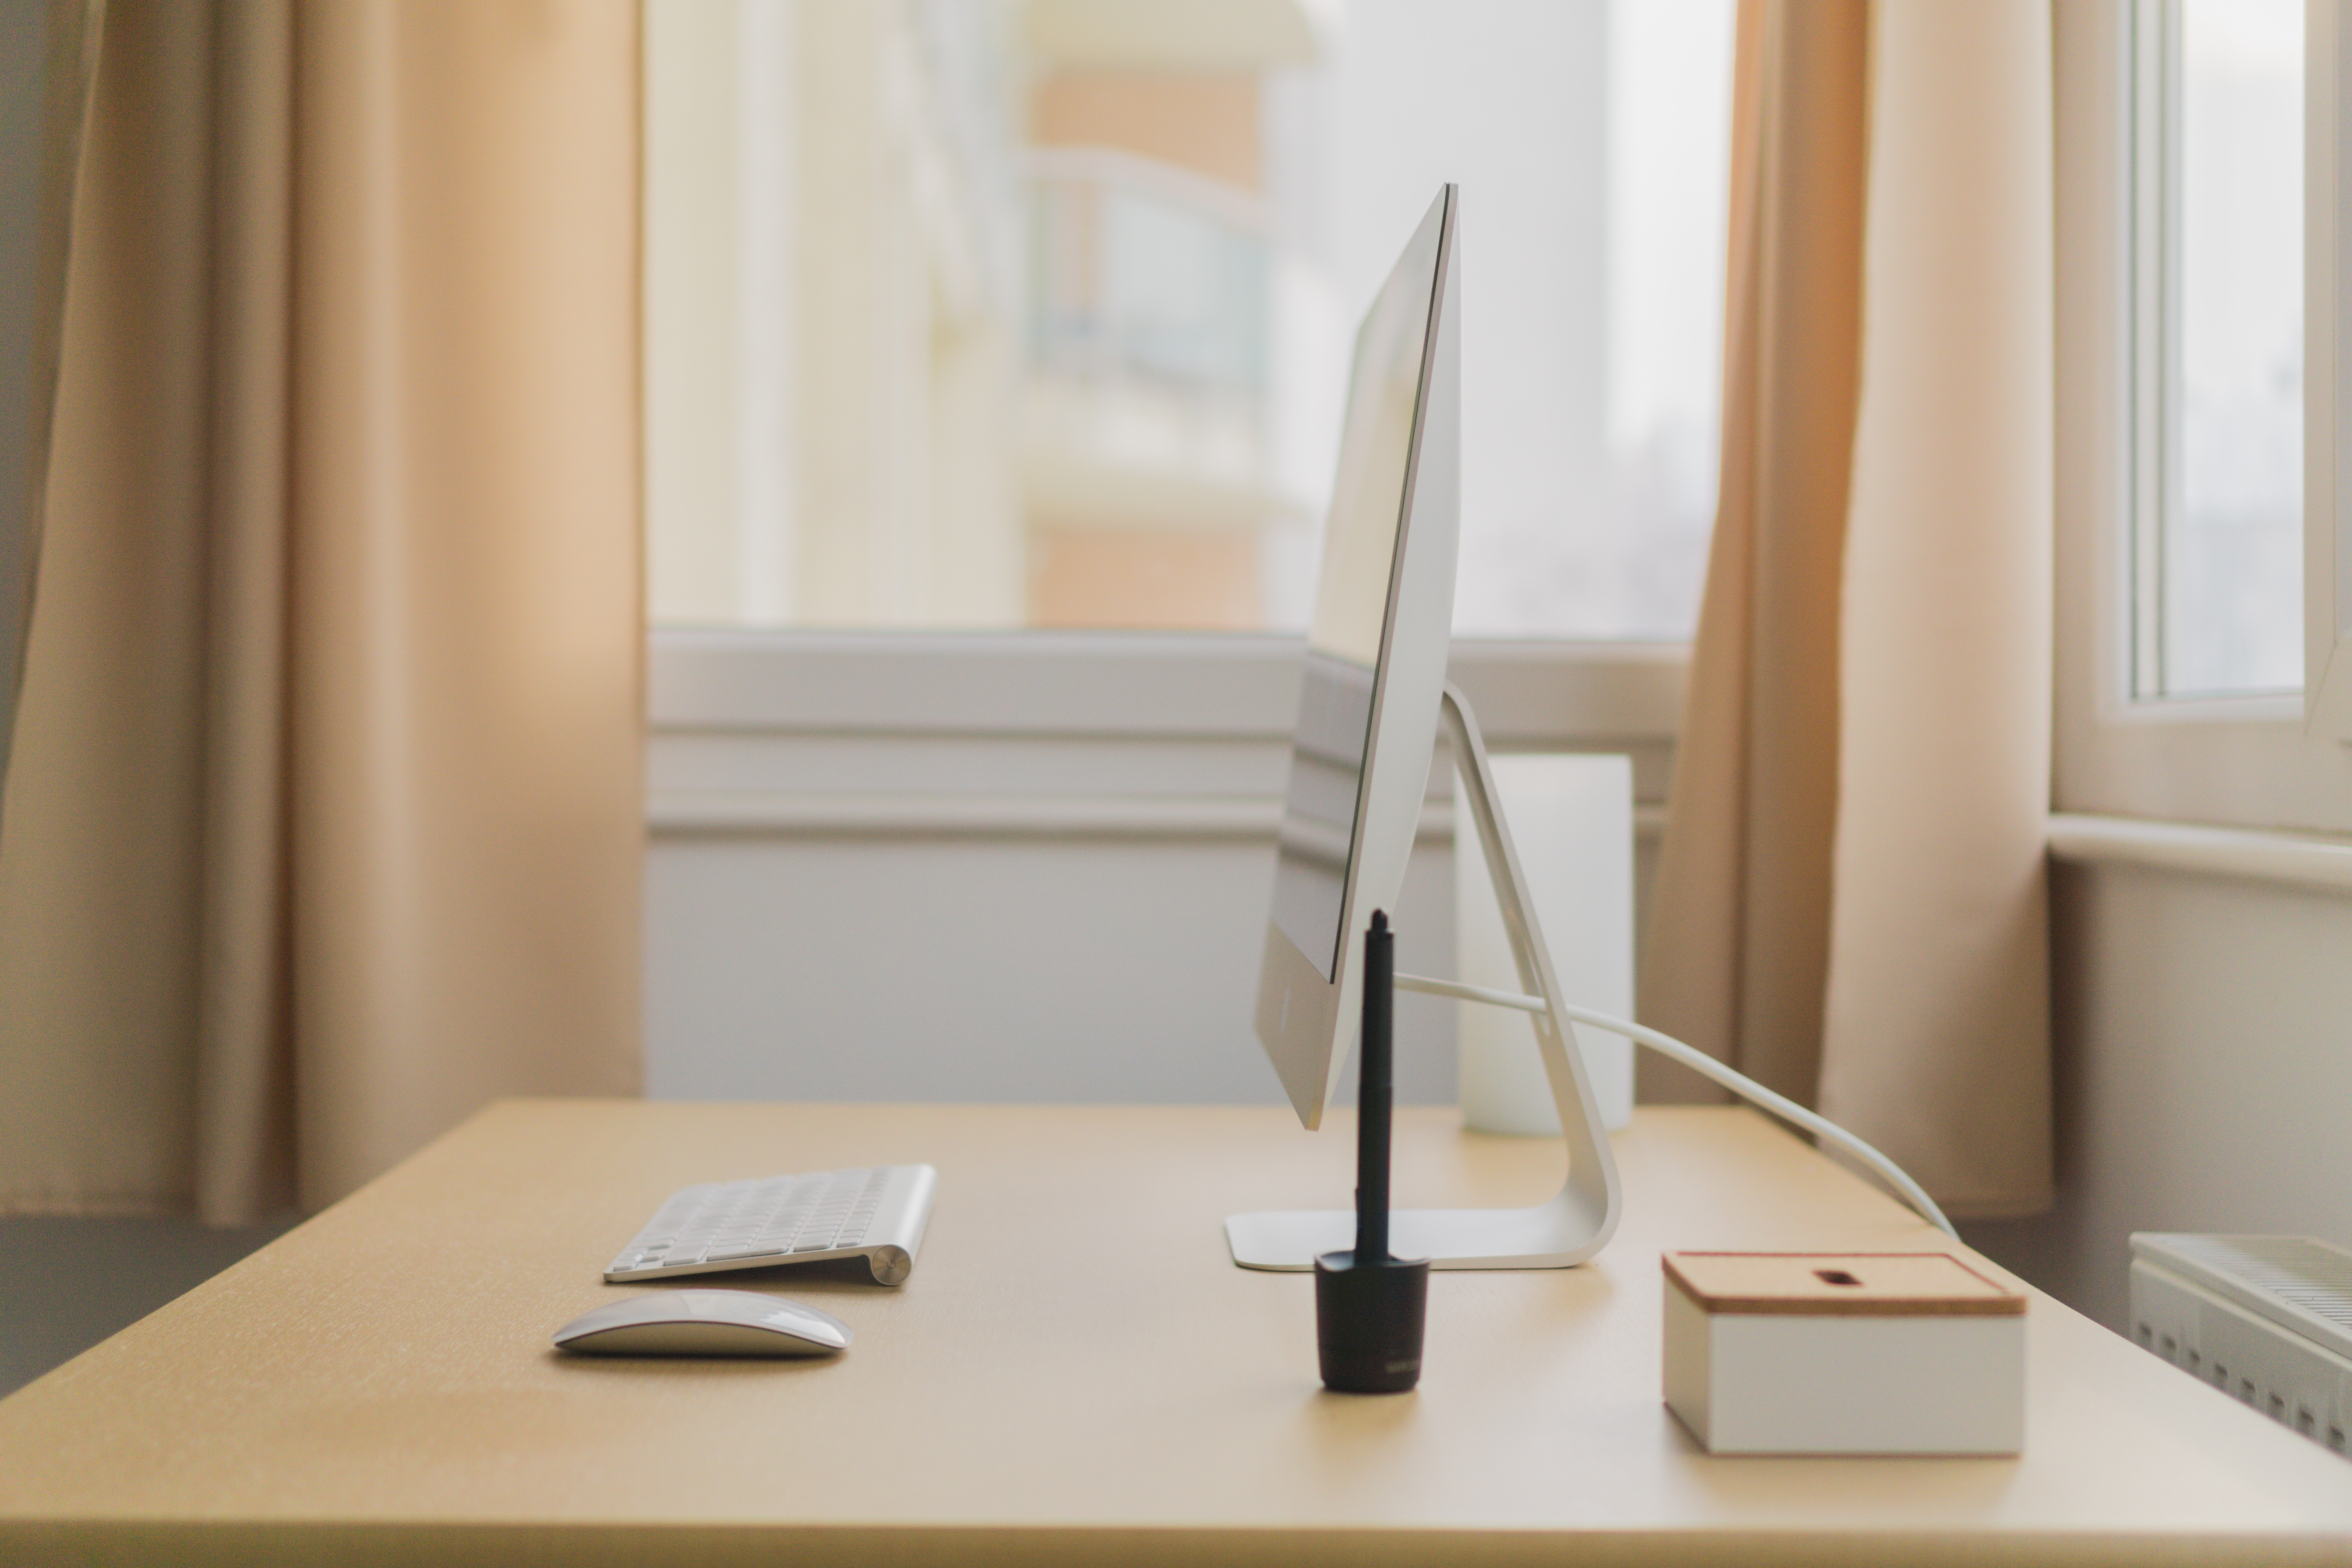 Working From Home: 5 Best Practices to Succeed | Connected Women